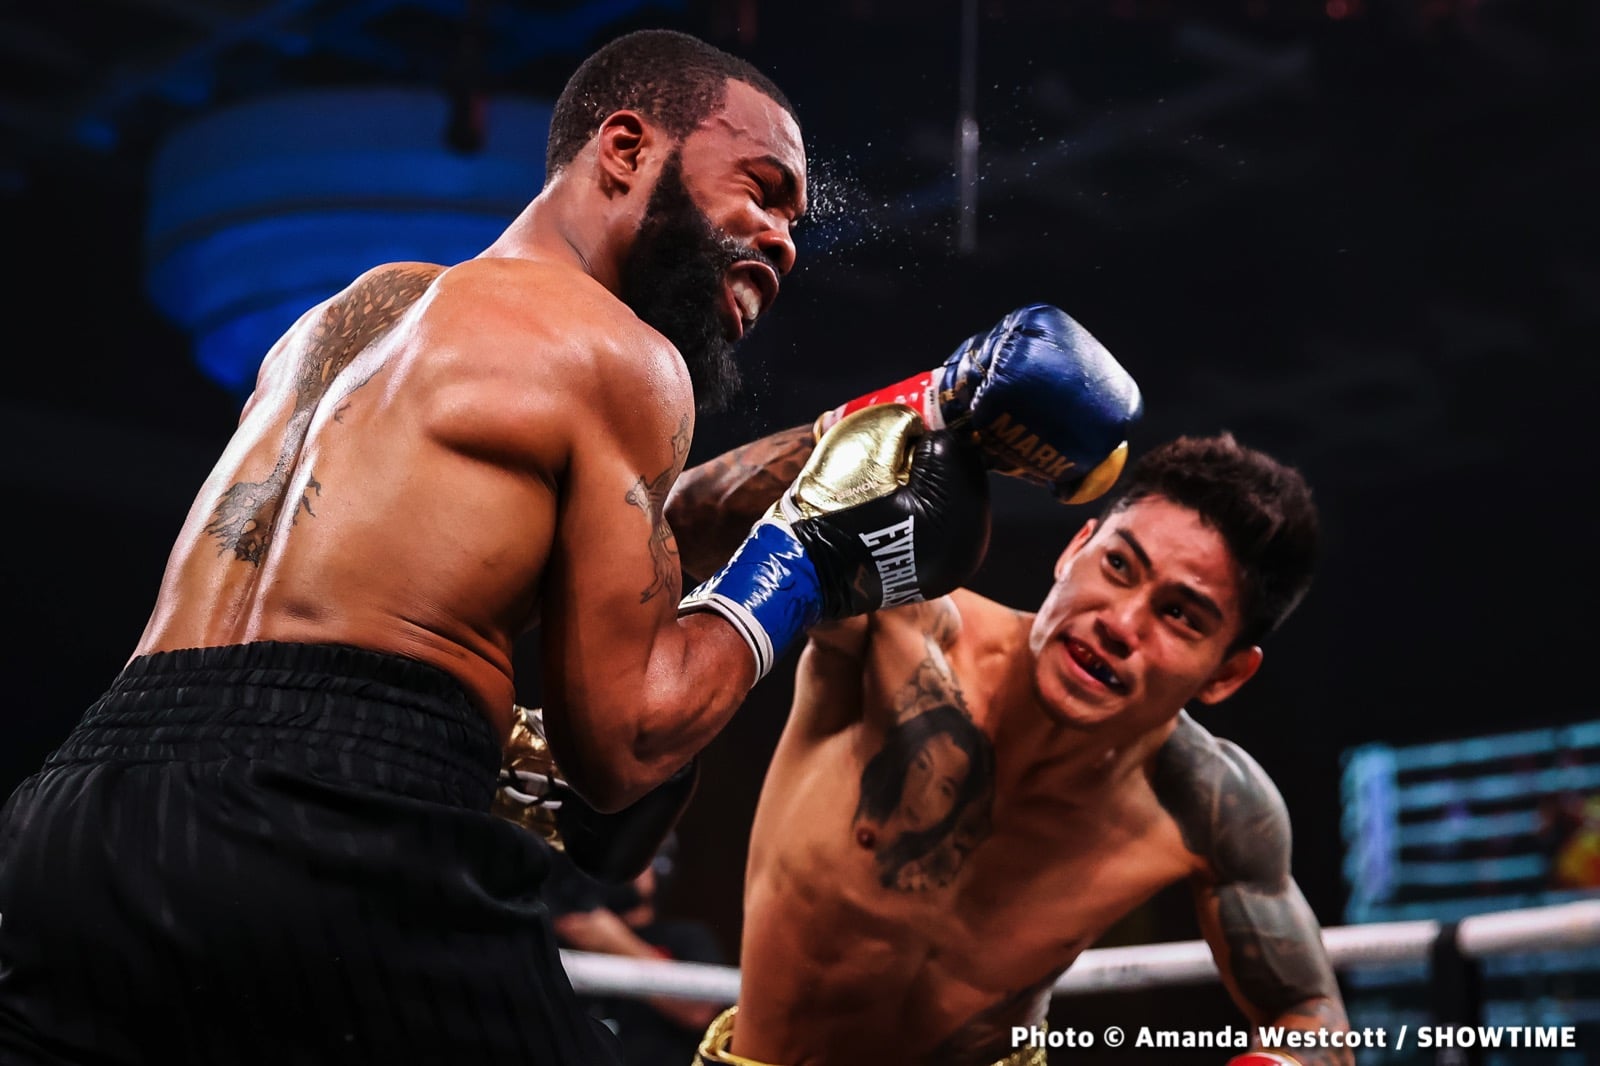 Gary Russell Jr. boxing photo